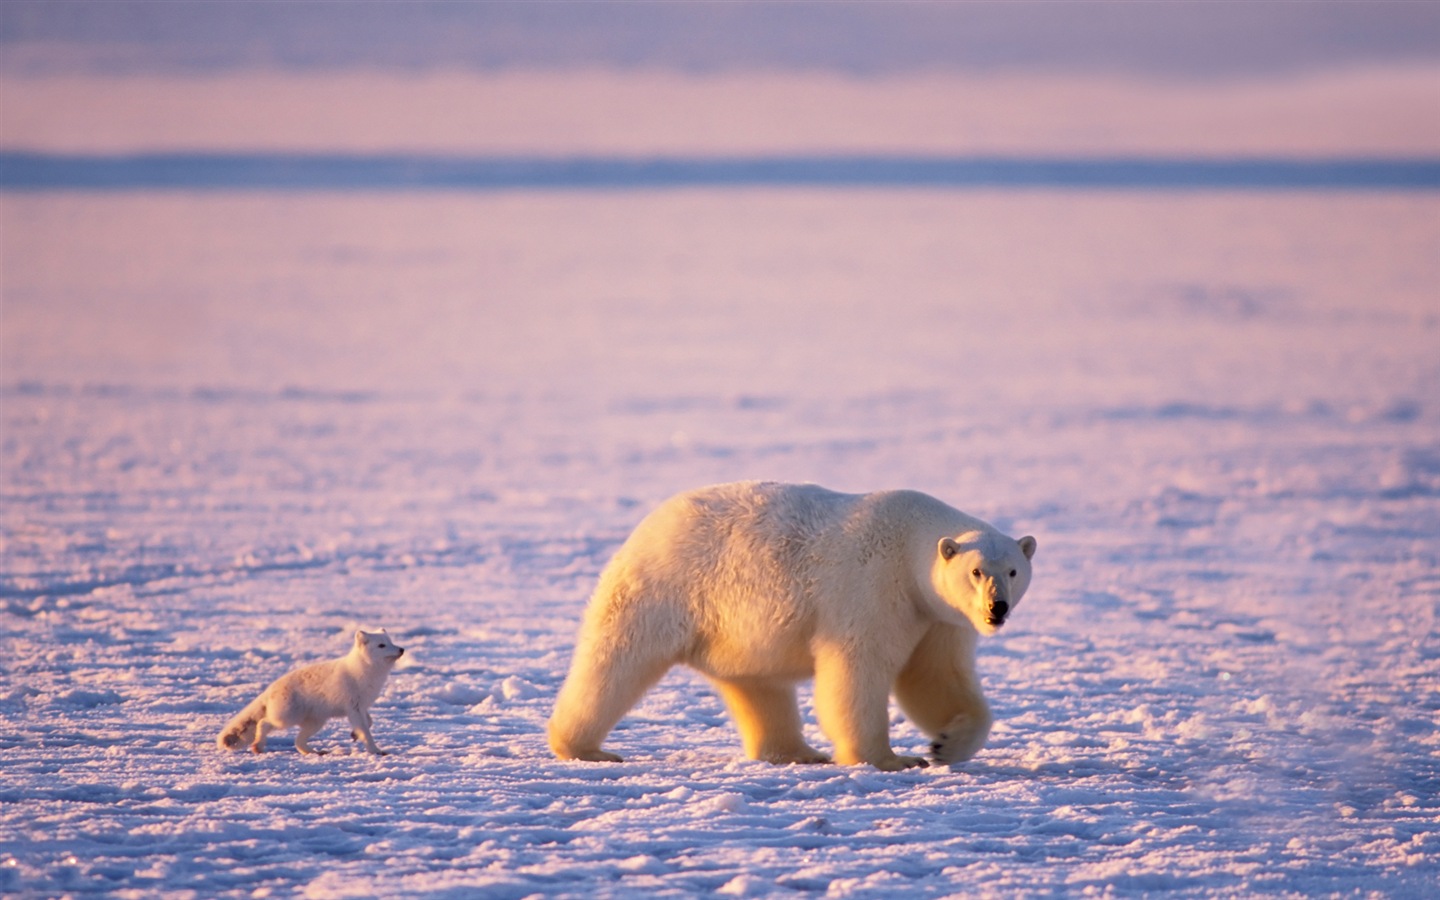 Windows 8 Wallpapers: Arctic, the nature ecological landscape, arctic animals #10 - 1440x900